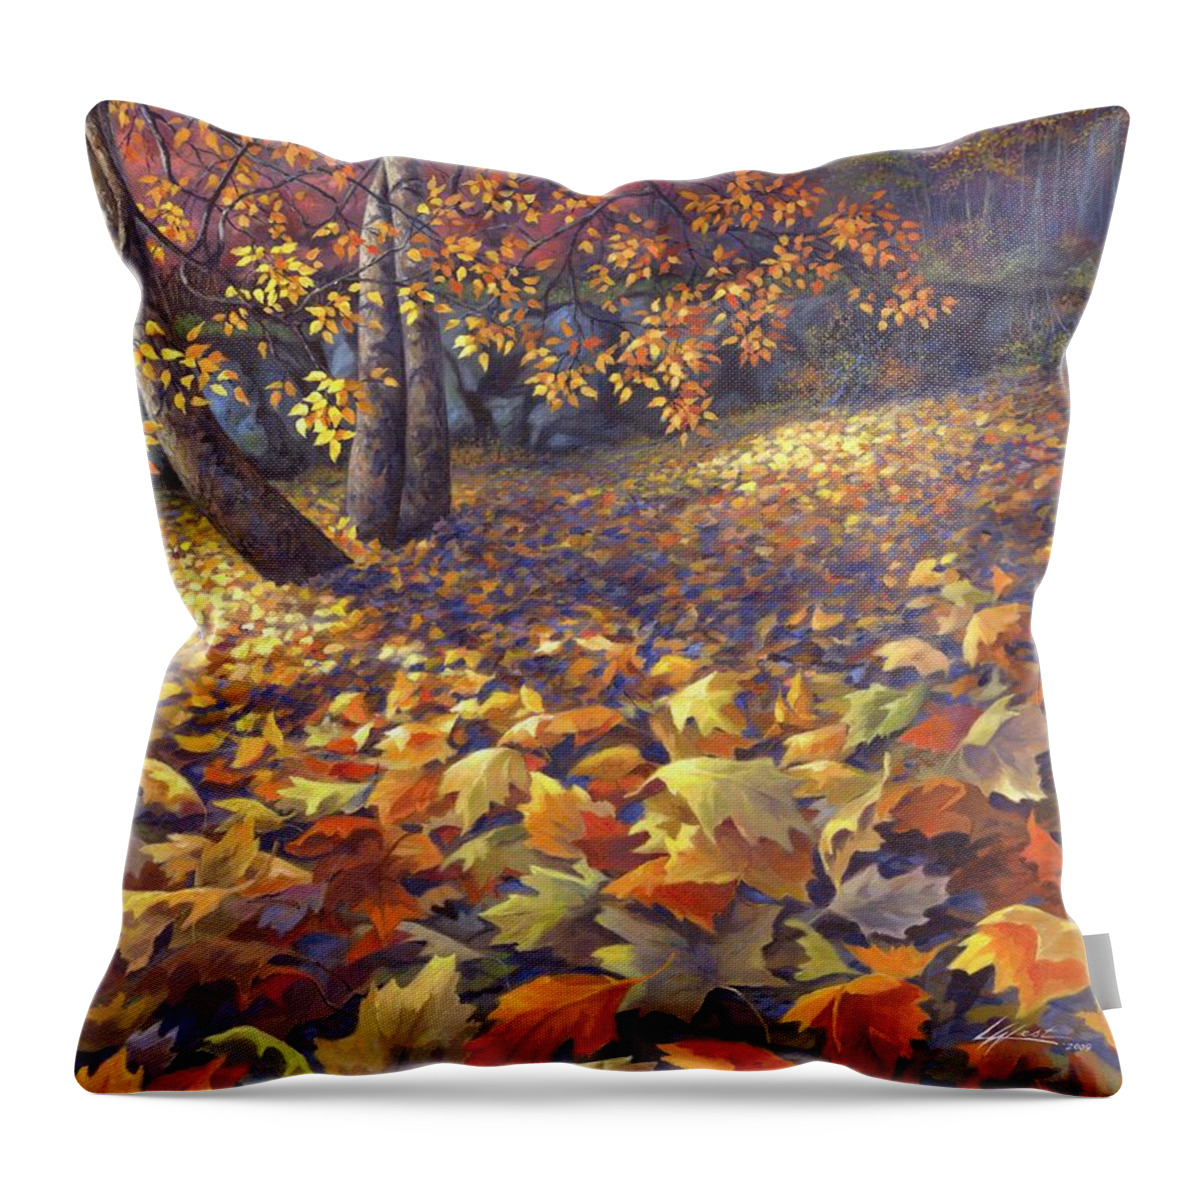 Autumn Scene Throw Pillow featuring the painting Toscas Trail by Lucy West